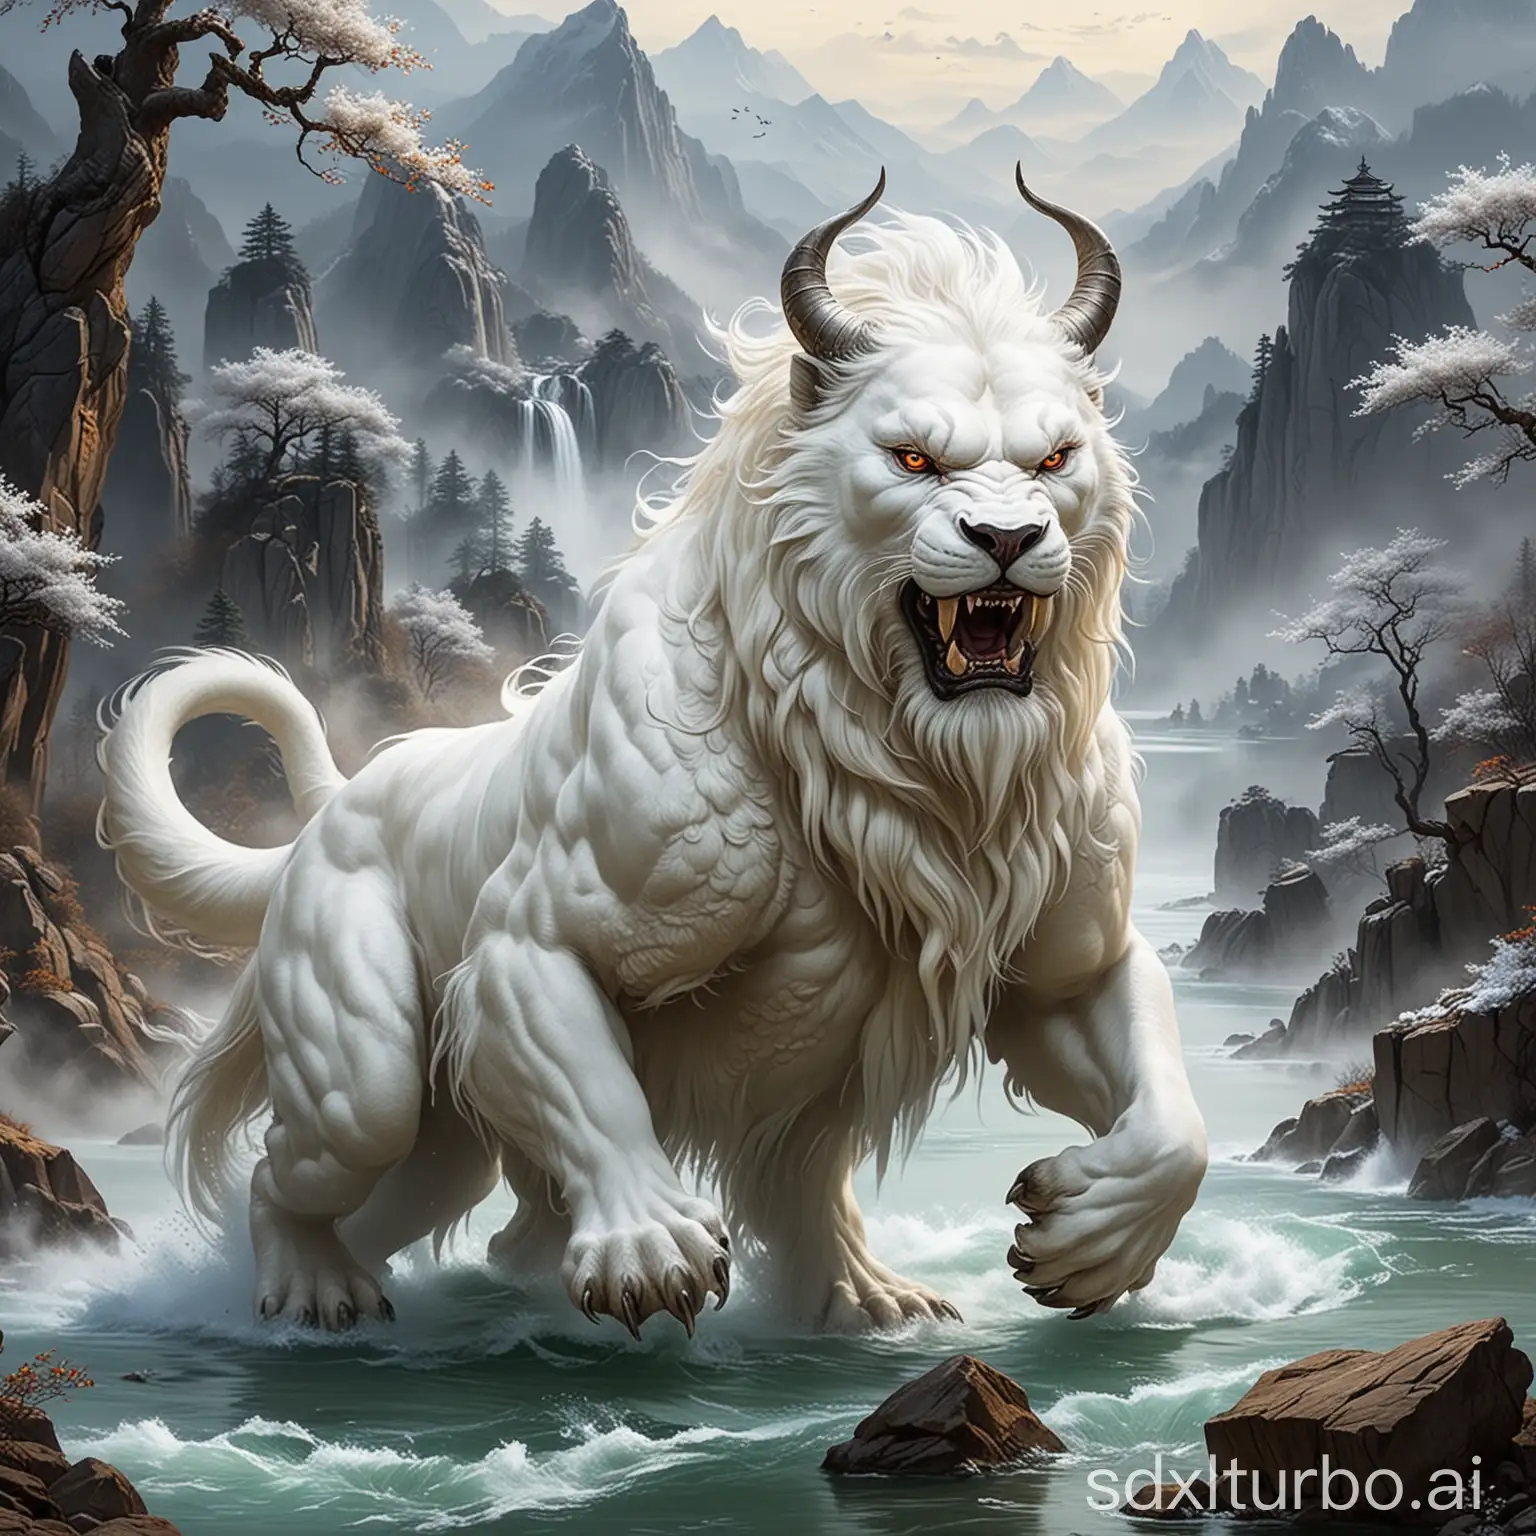 Bai Ze, Bai Ze is a mythical beast on Mount Kunlun, pure white all over, capable of speaking human language, understanding the feelings of all things. It's a highly revered creature in ancient Chinese mythology, capable of turning misfortune into fortune. "Ze" here refers to lakes or water sources.